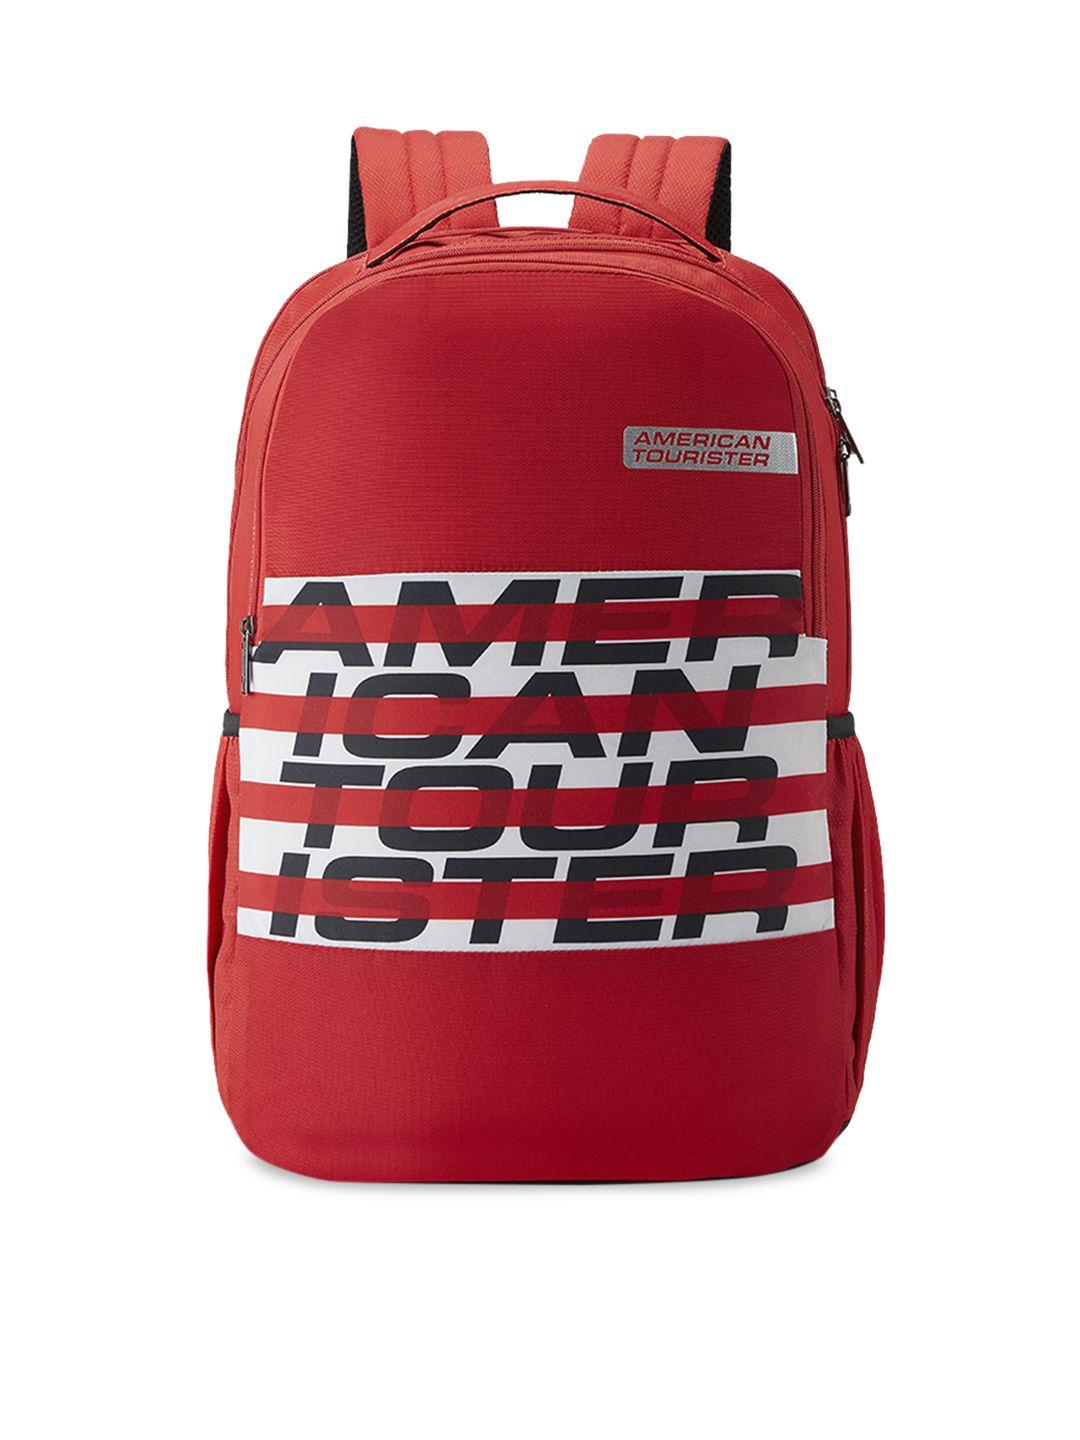 american tourister unisex red brand logo backpack